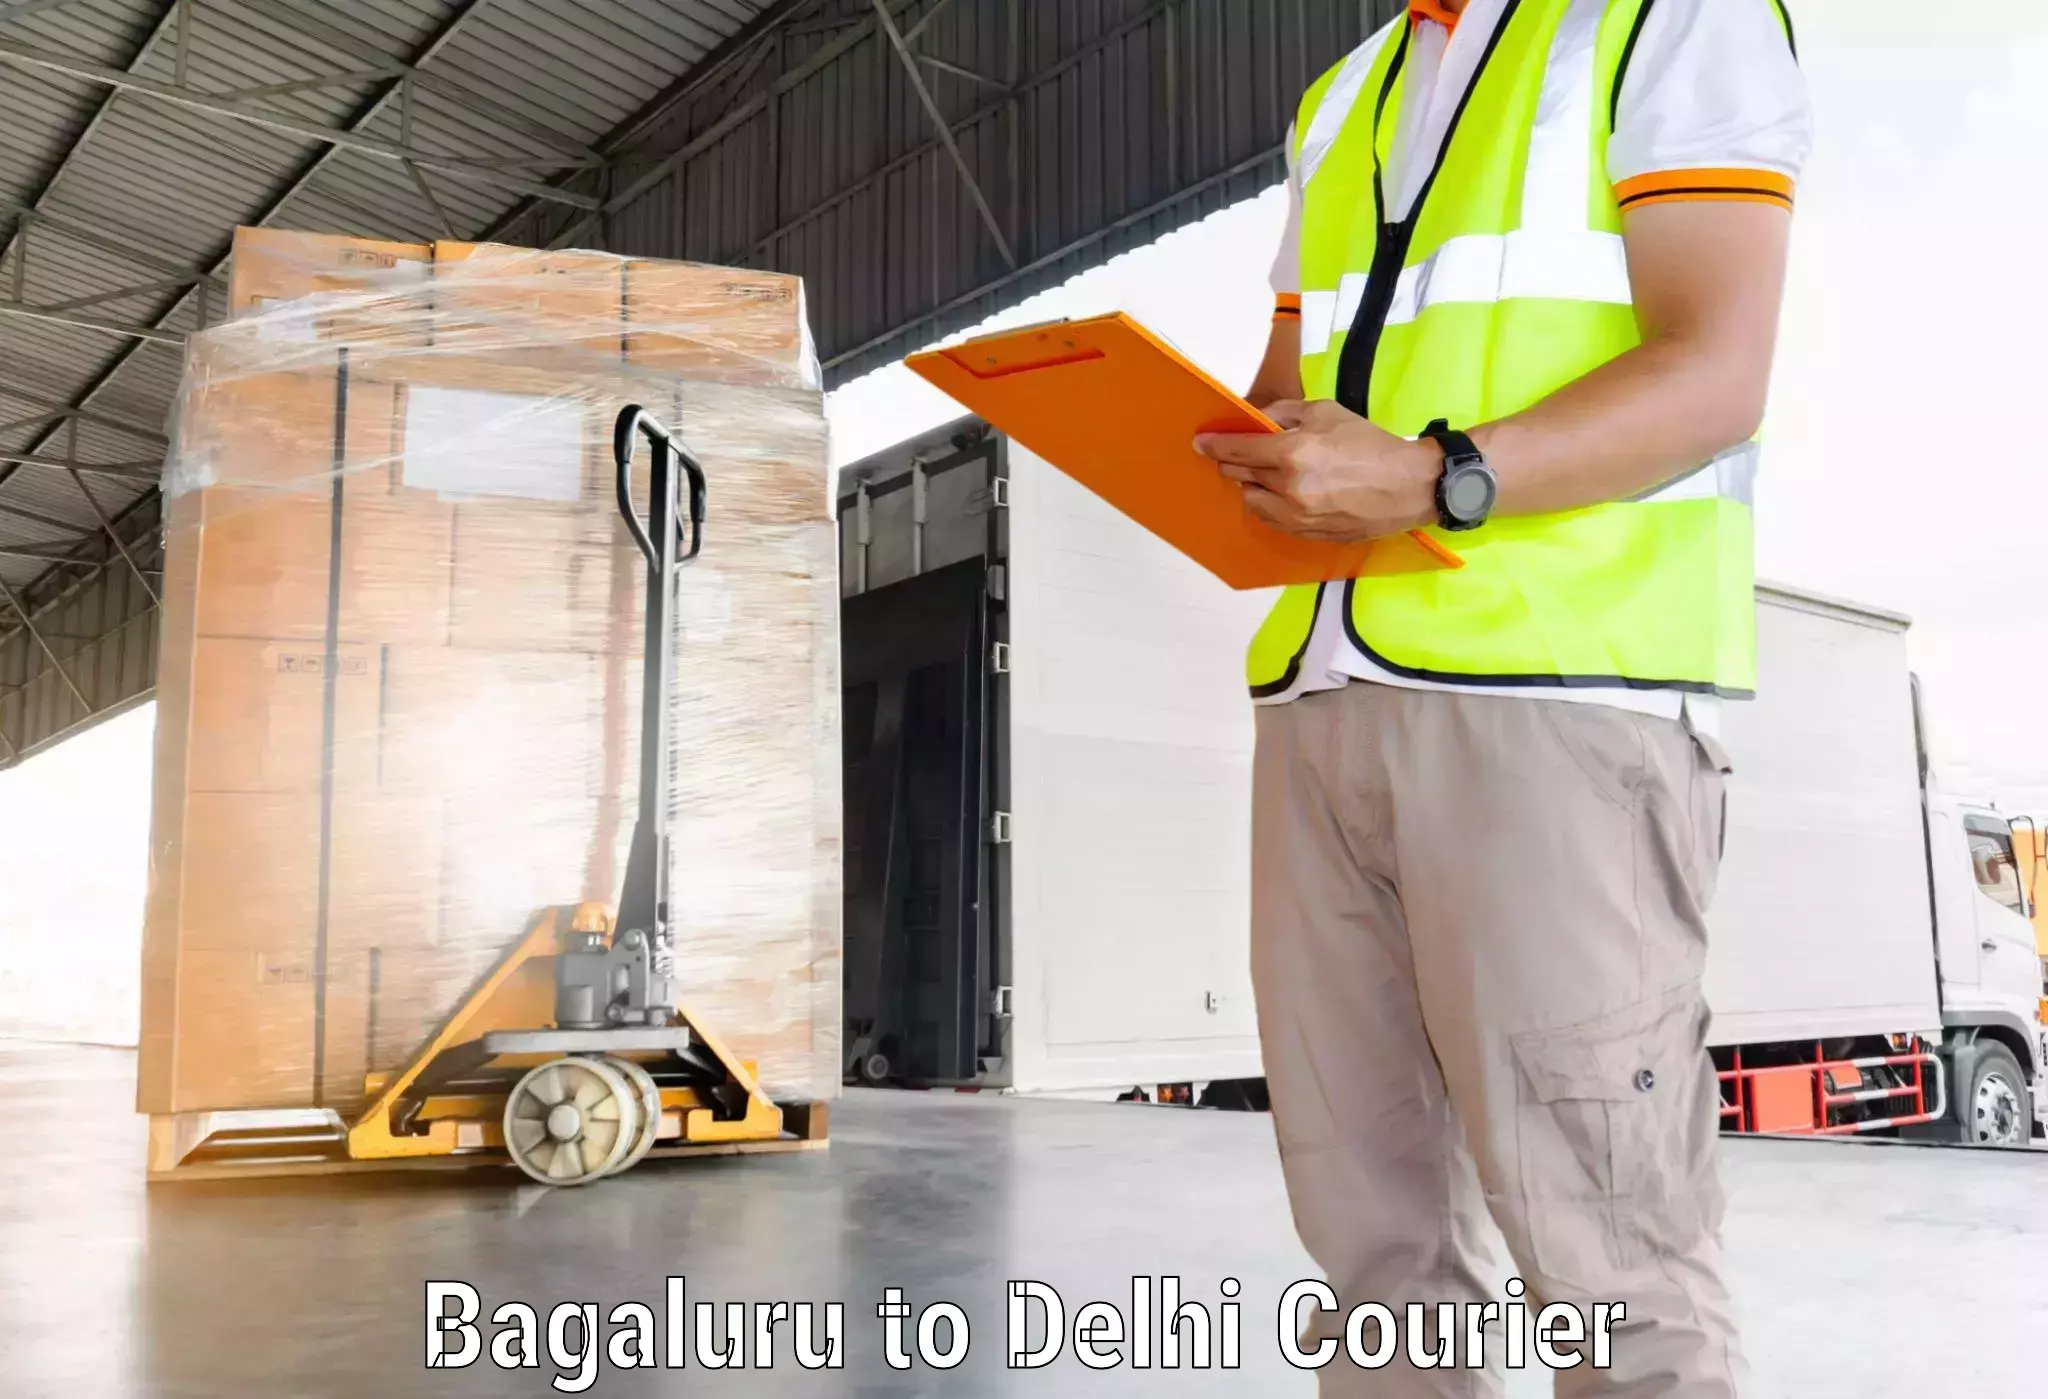 Full-service courier options Bagaluru to NCR